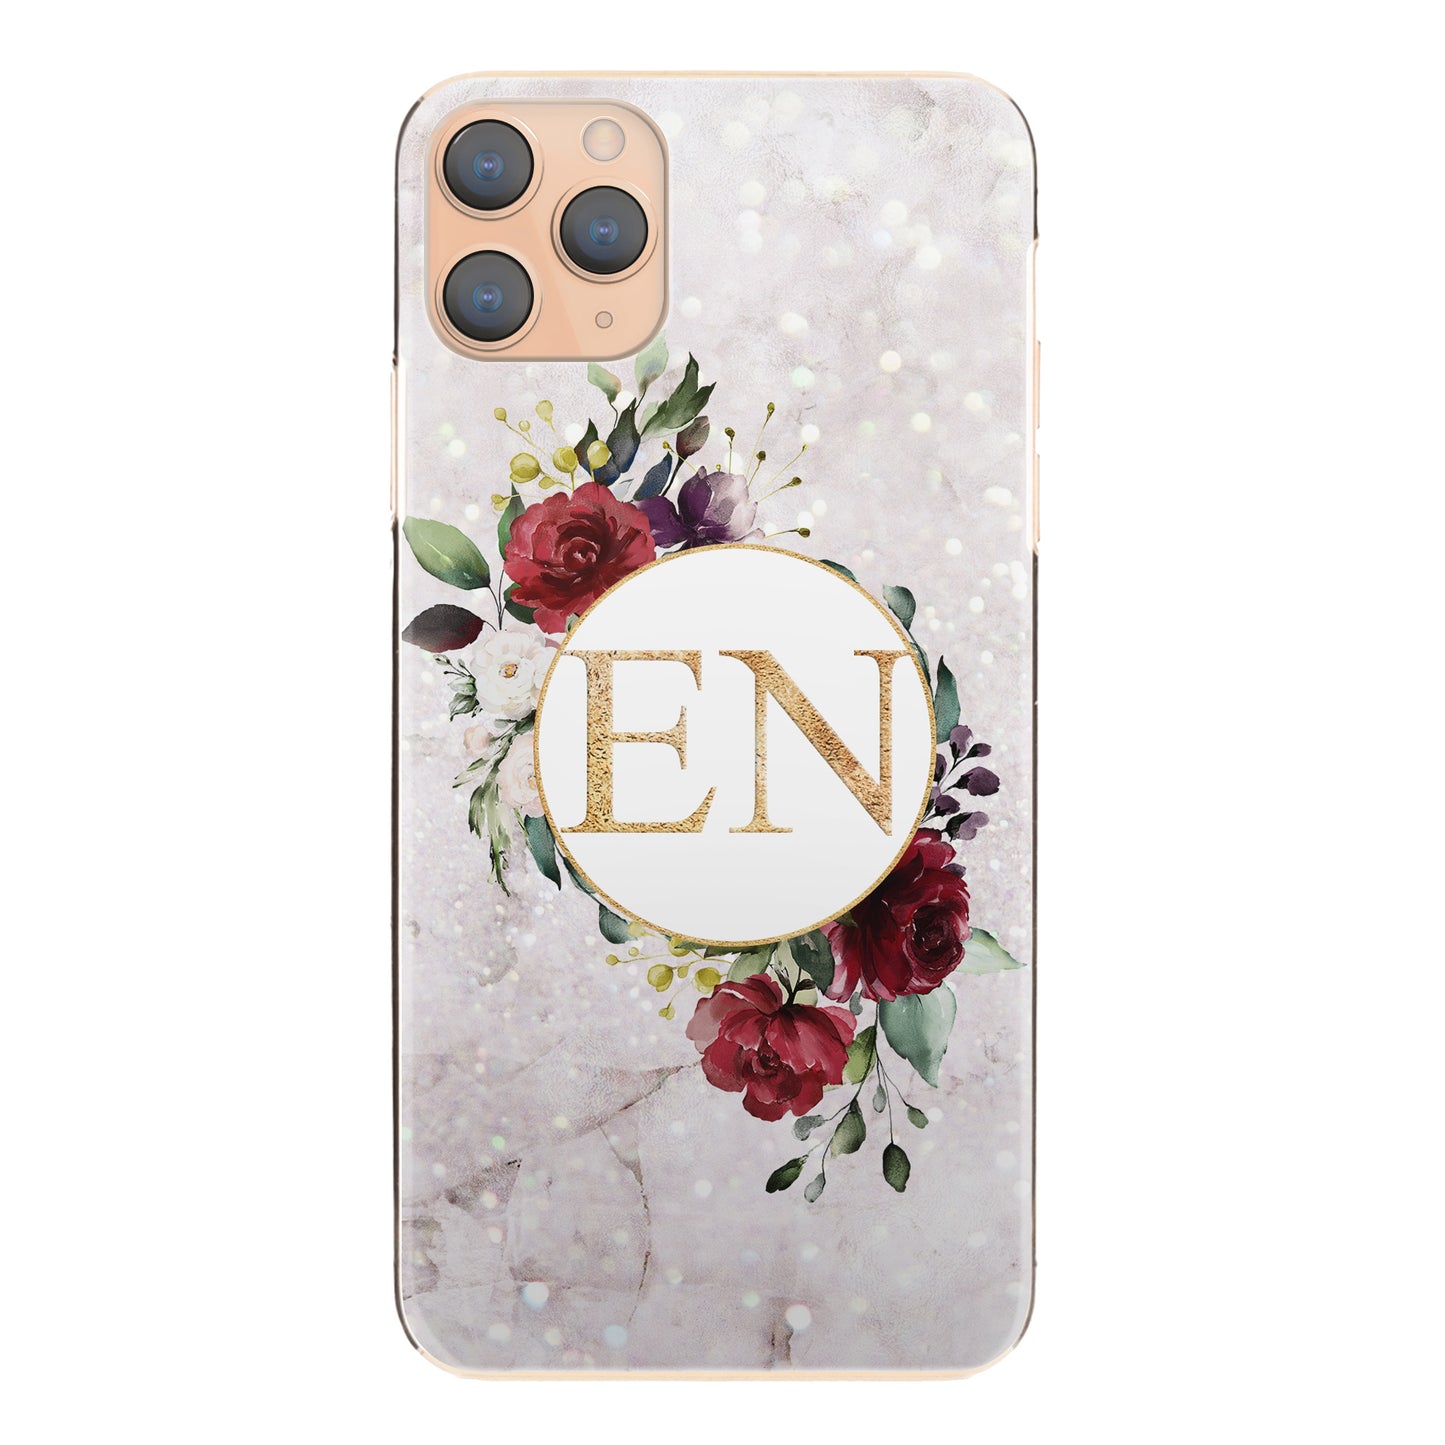 Personalised Huawei Phone Hard Case with Floral Gold Initials on Crystal Marble